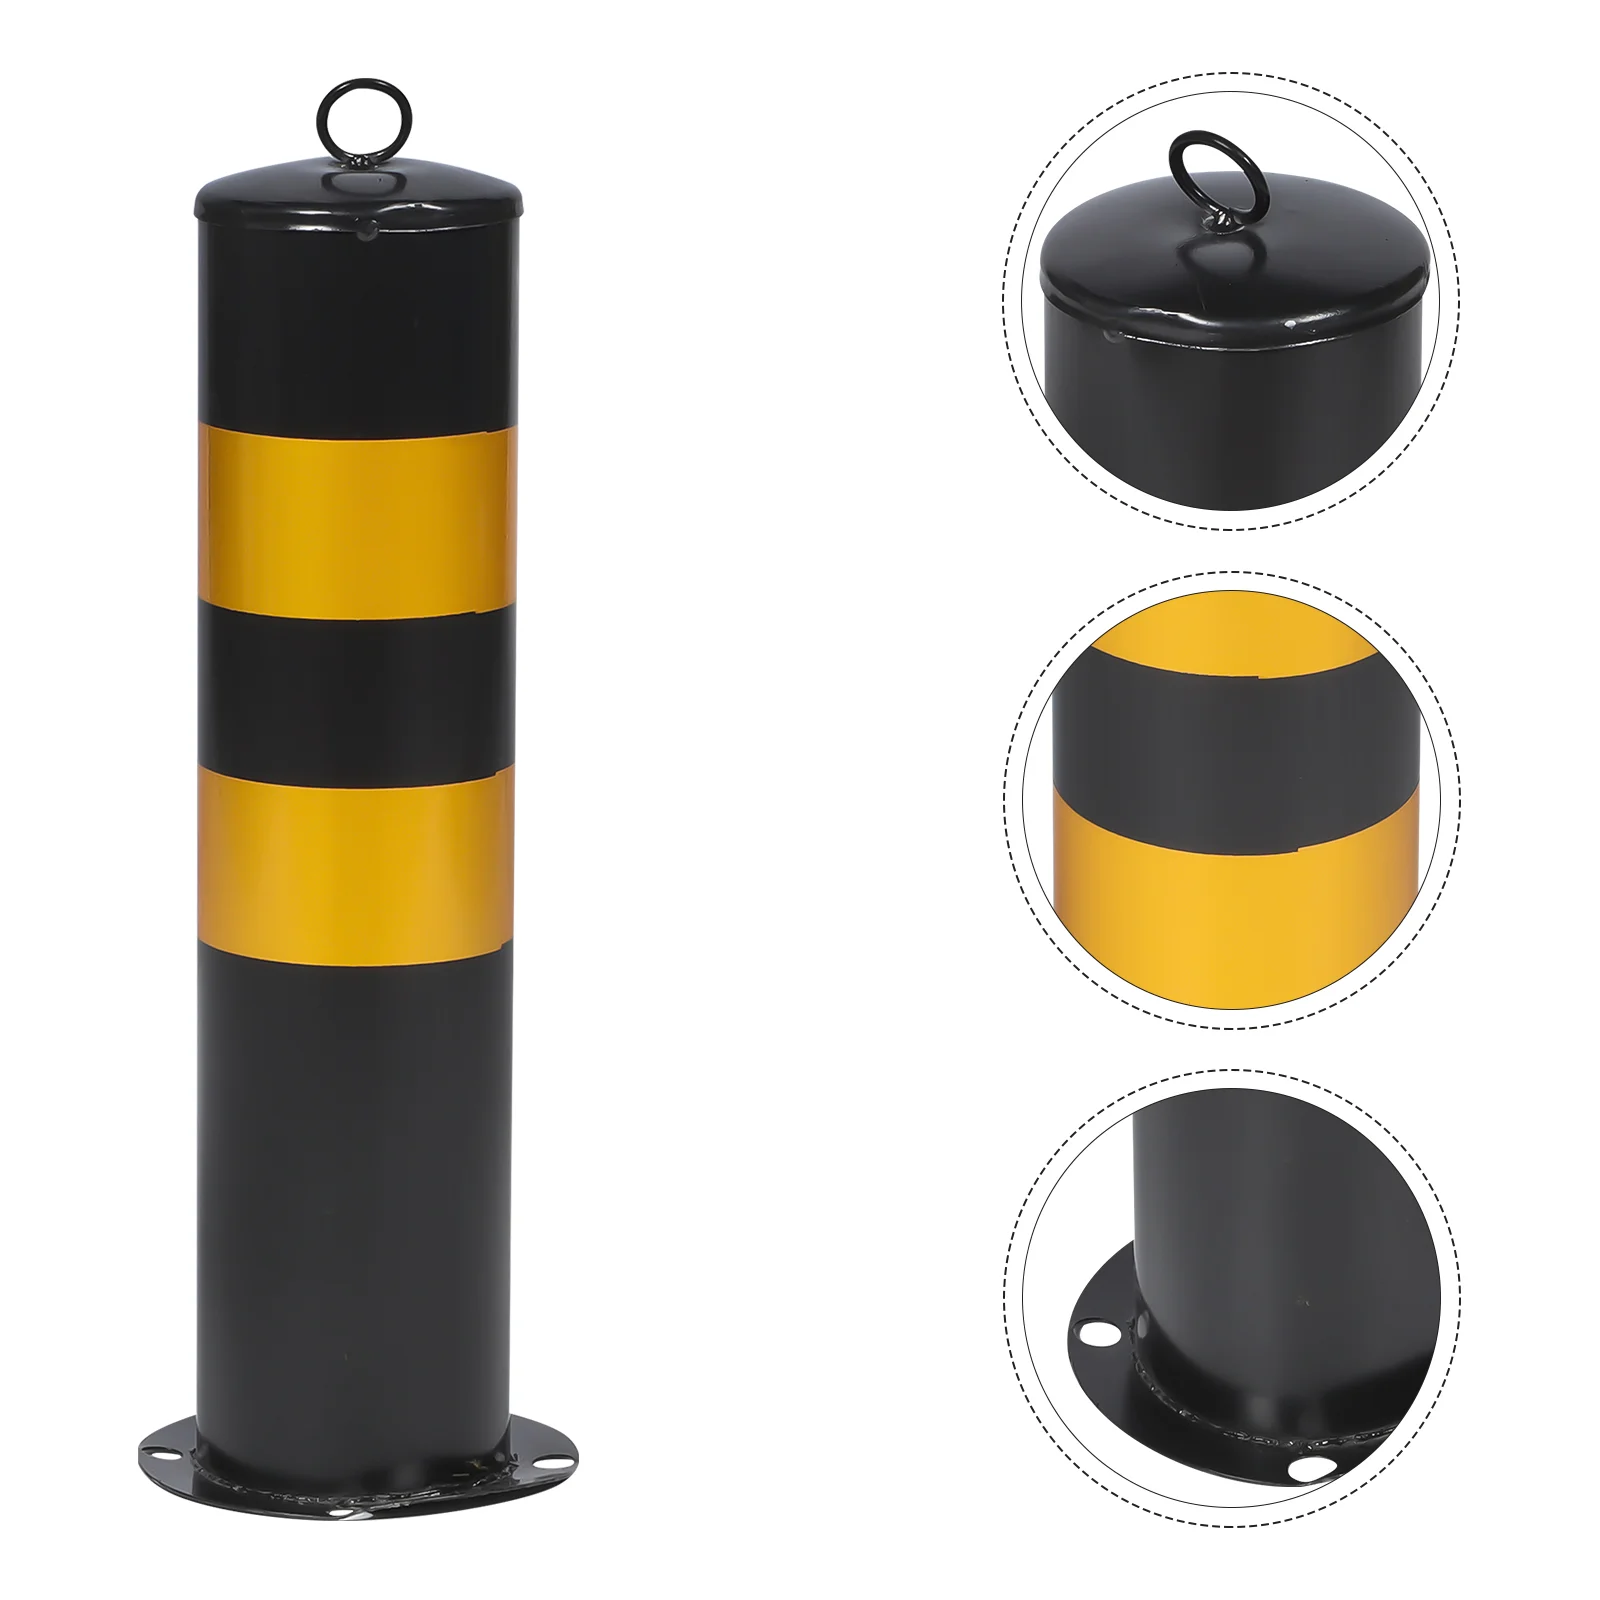 Safety Traffic Bollard Post Parking Driveway Barrier Lot Column Cones Bollards Pile Fence Gate Delineator Guard High Stopper baby safety gate baby fence stairs barrier pet pet dog fence pole isolation fixed gate safety protection